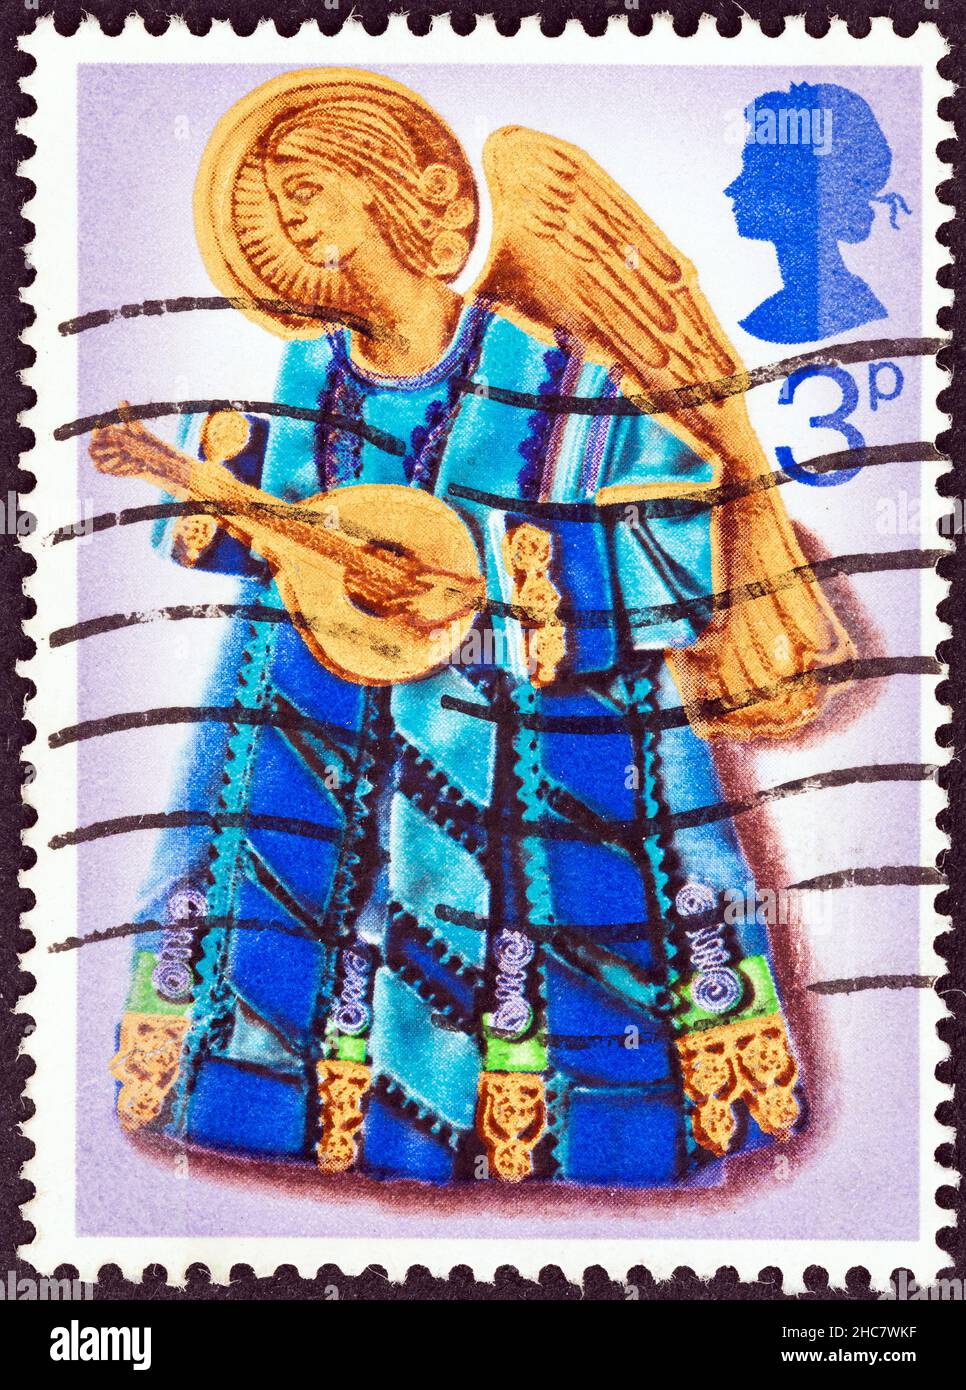 UNITED KINGDOM - CIRCA 1972: A stamp printed in United Kingdom from the "Christmas " issue shows Angel playing lute, circa 1972. Stock Photo